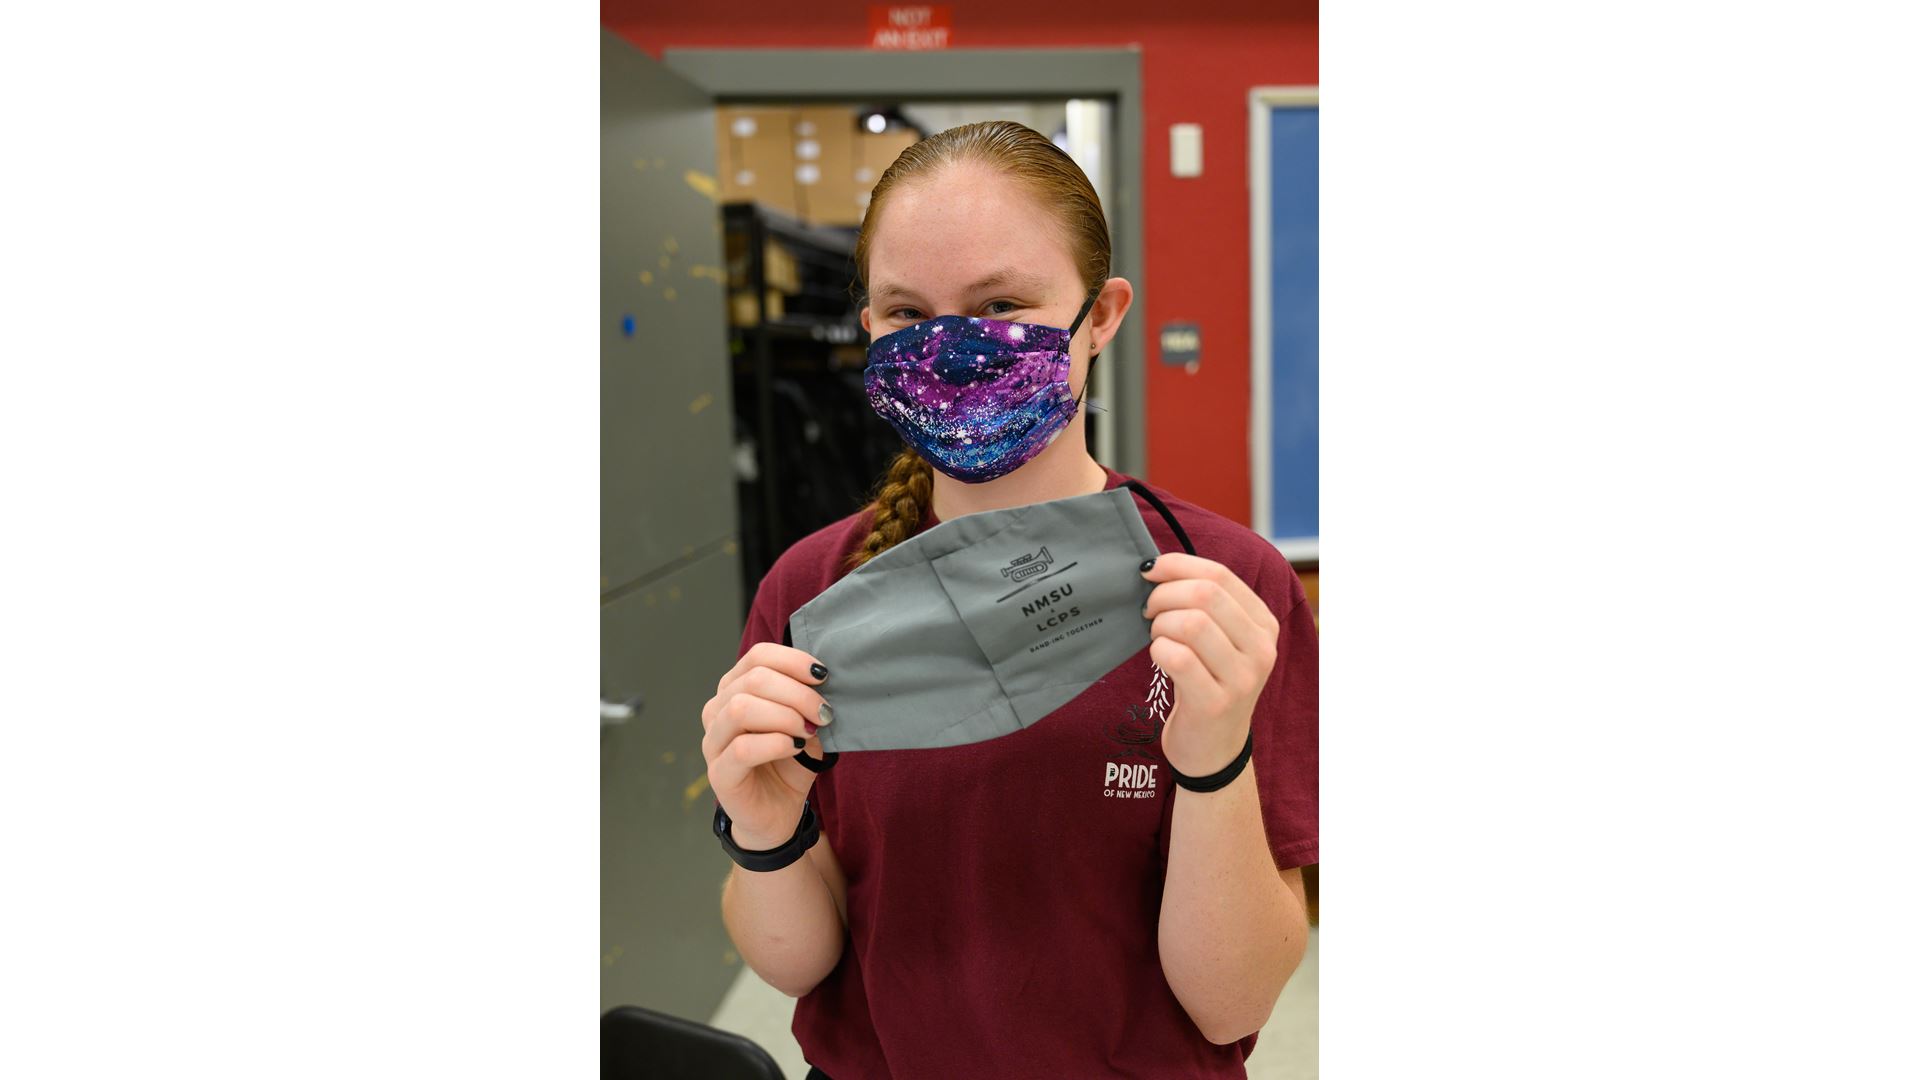 NMSU Pride band plays on with the help of student-designed masks